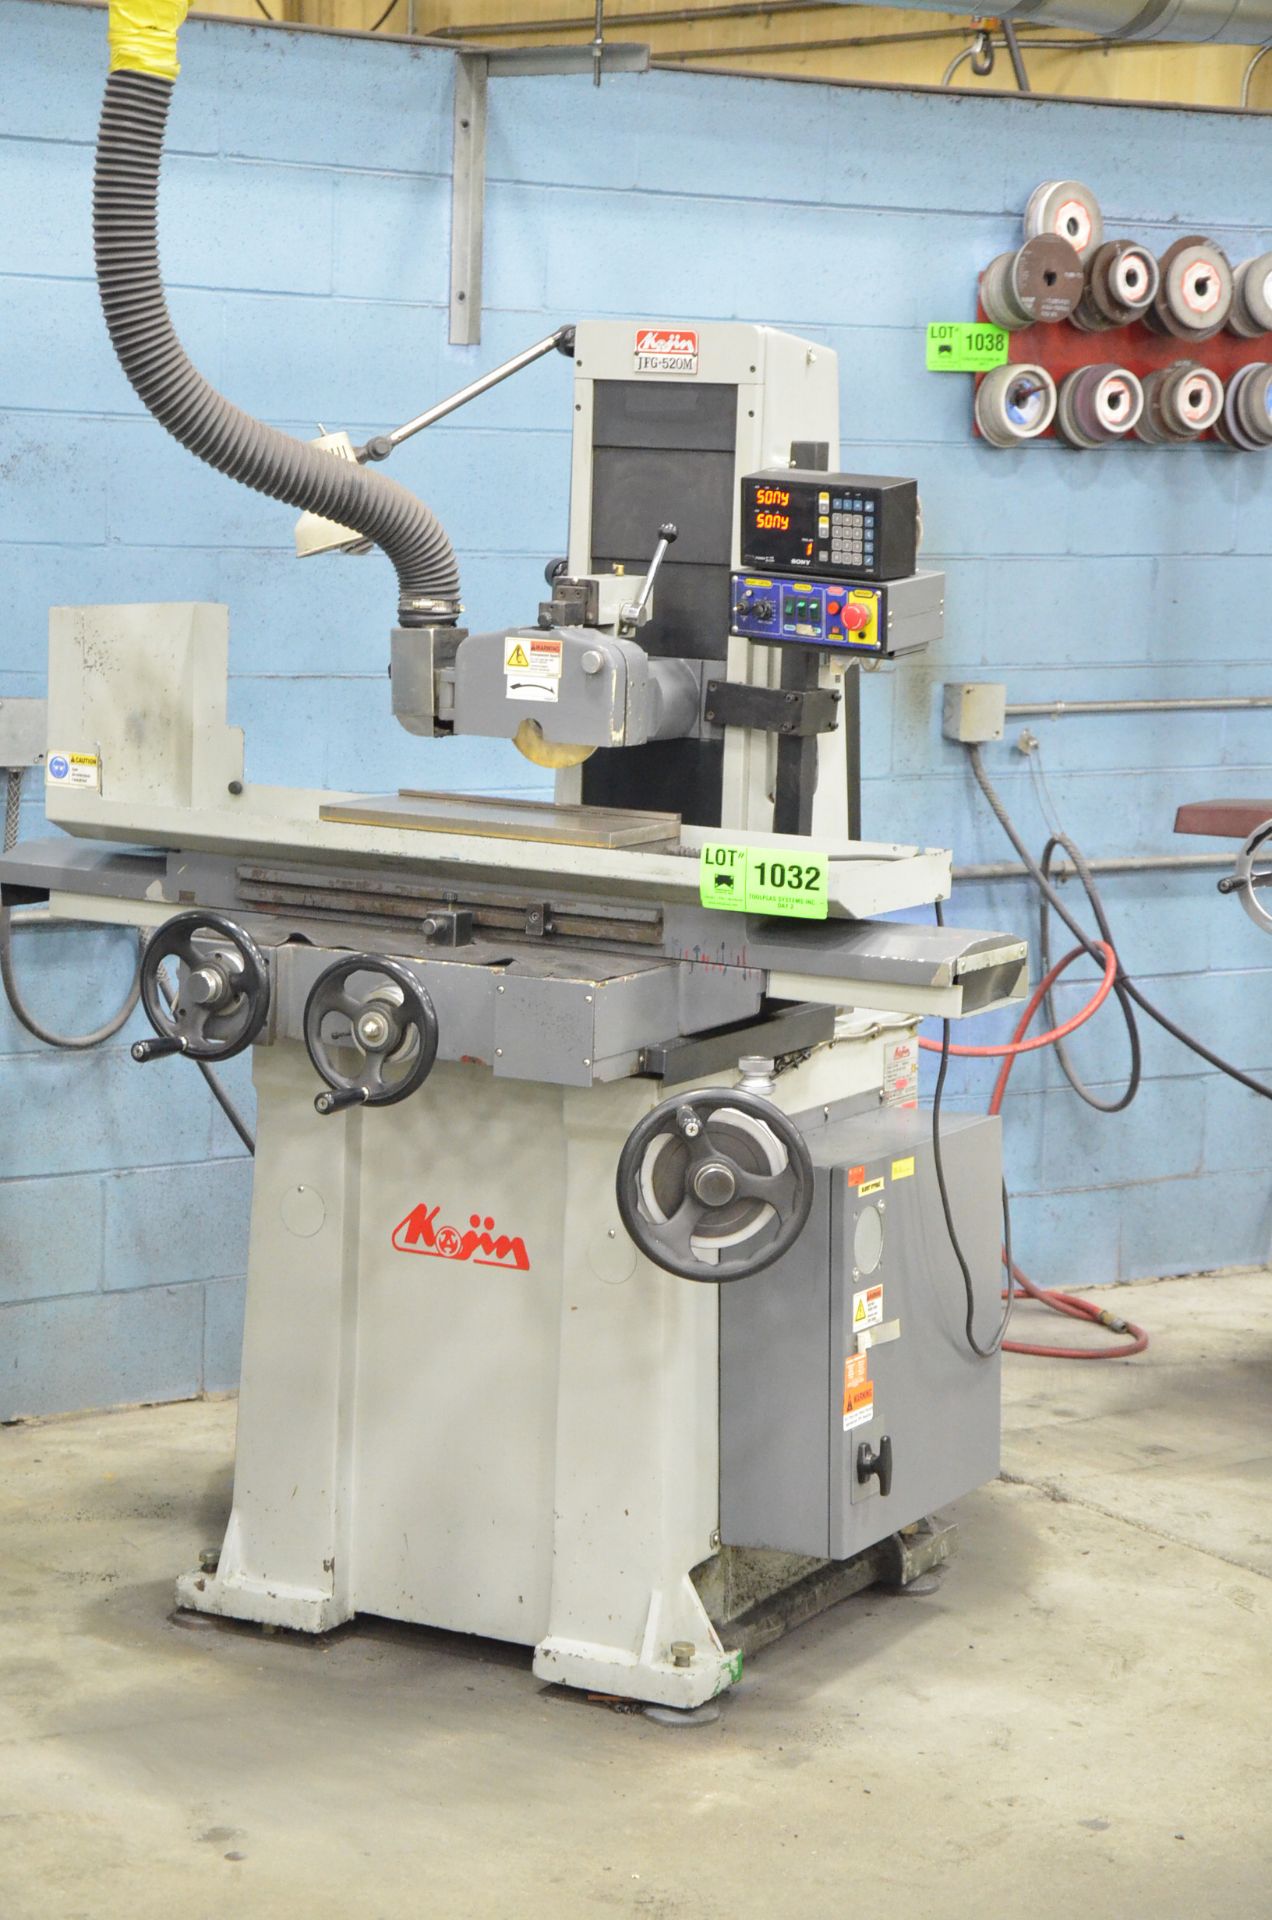 JIN YOUNG (2008) JFG-520M CONVENTIONAL SURFACE GRINDER WITH 8"X18" MAGNETIC CHUCK, 8" WHEEL,